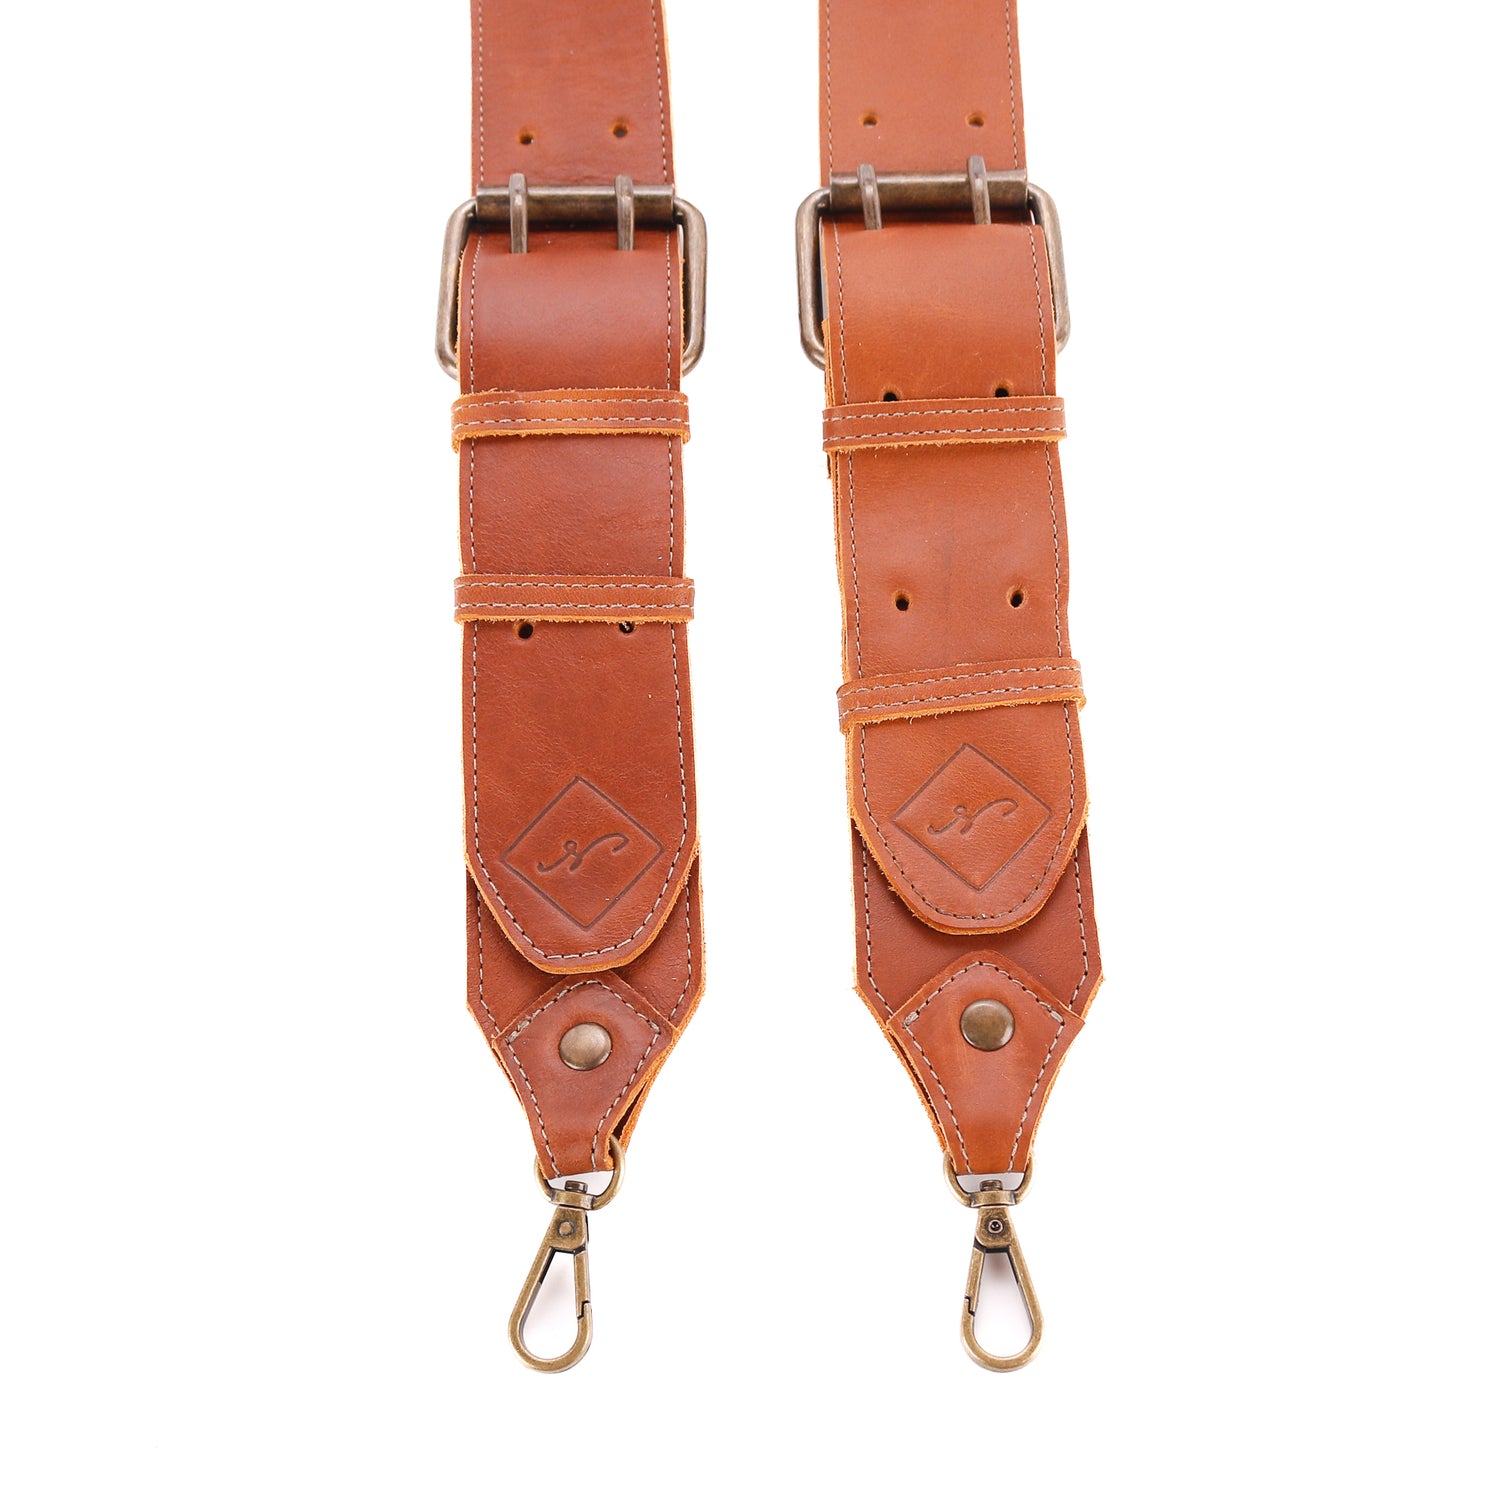 DOUBLE BUCKLE BACKPACK STRAP SET - CAFE – Nena & Co.